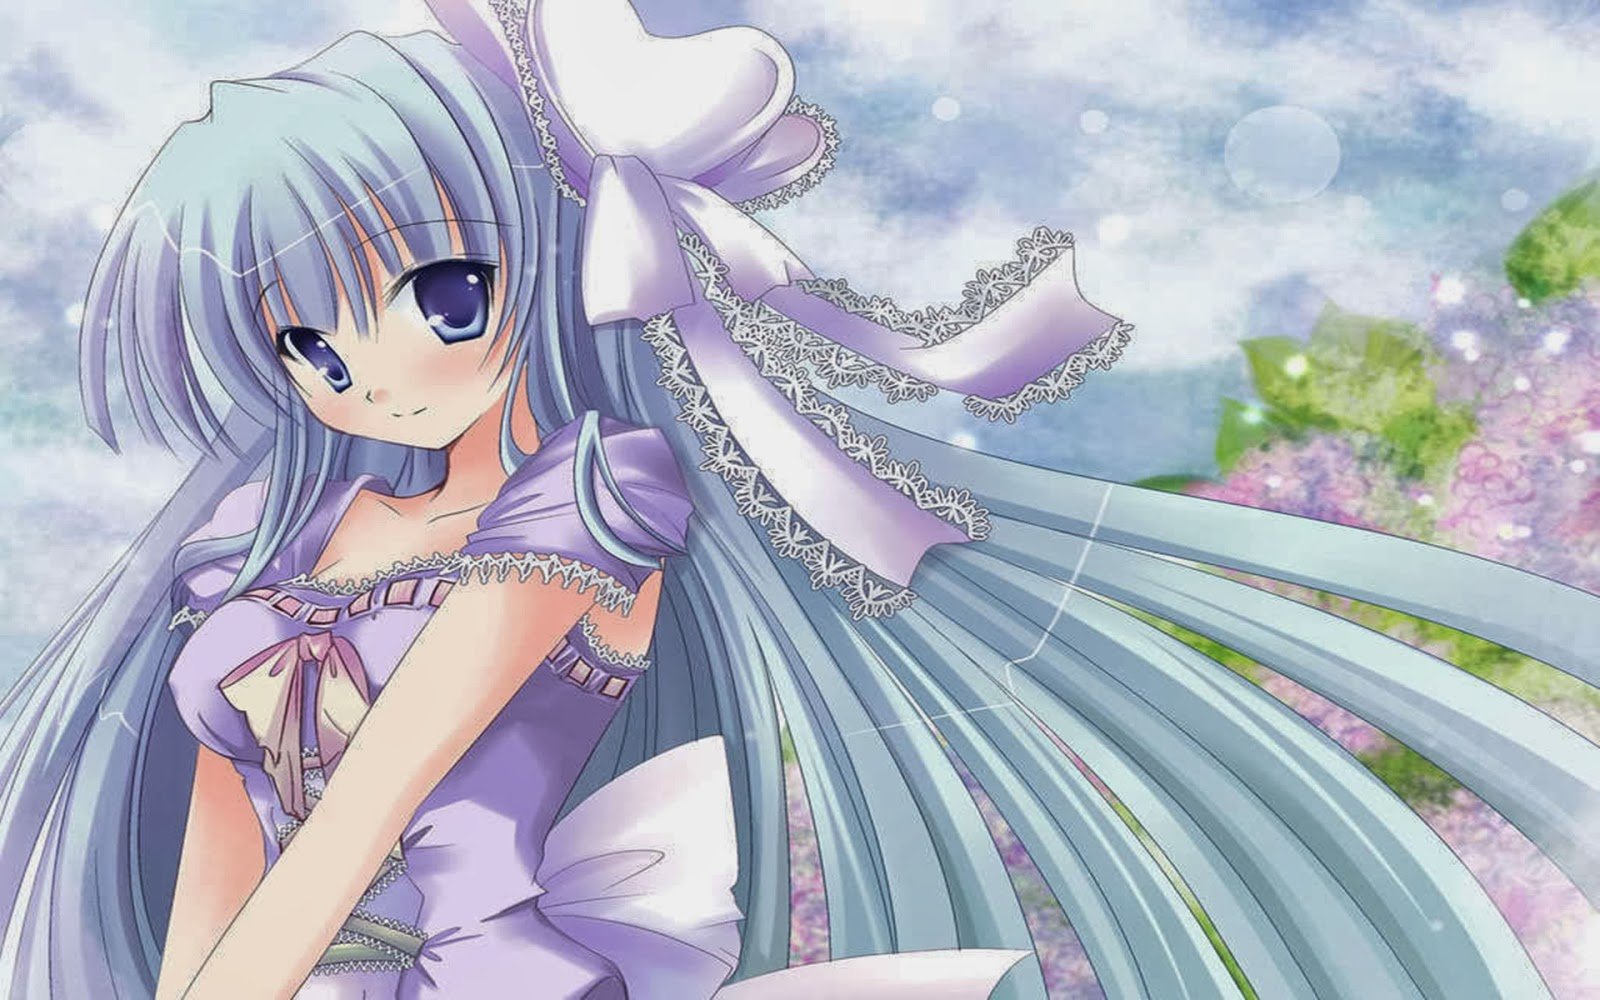 Cute girl anime wallpaper collection Charming collection 1600x1000